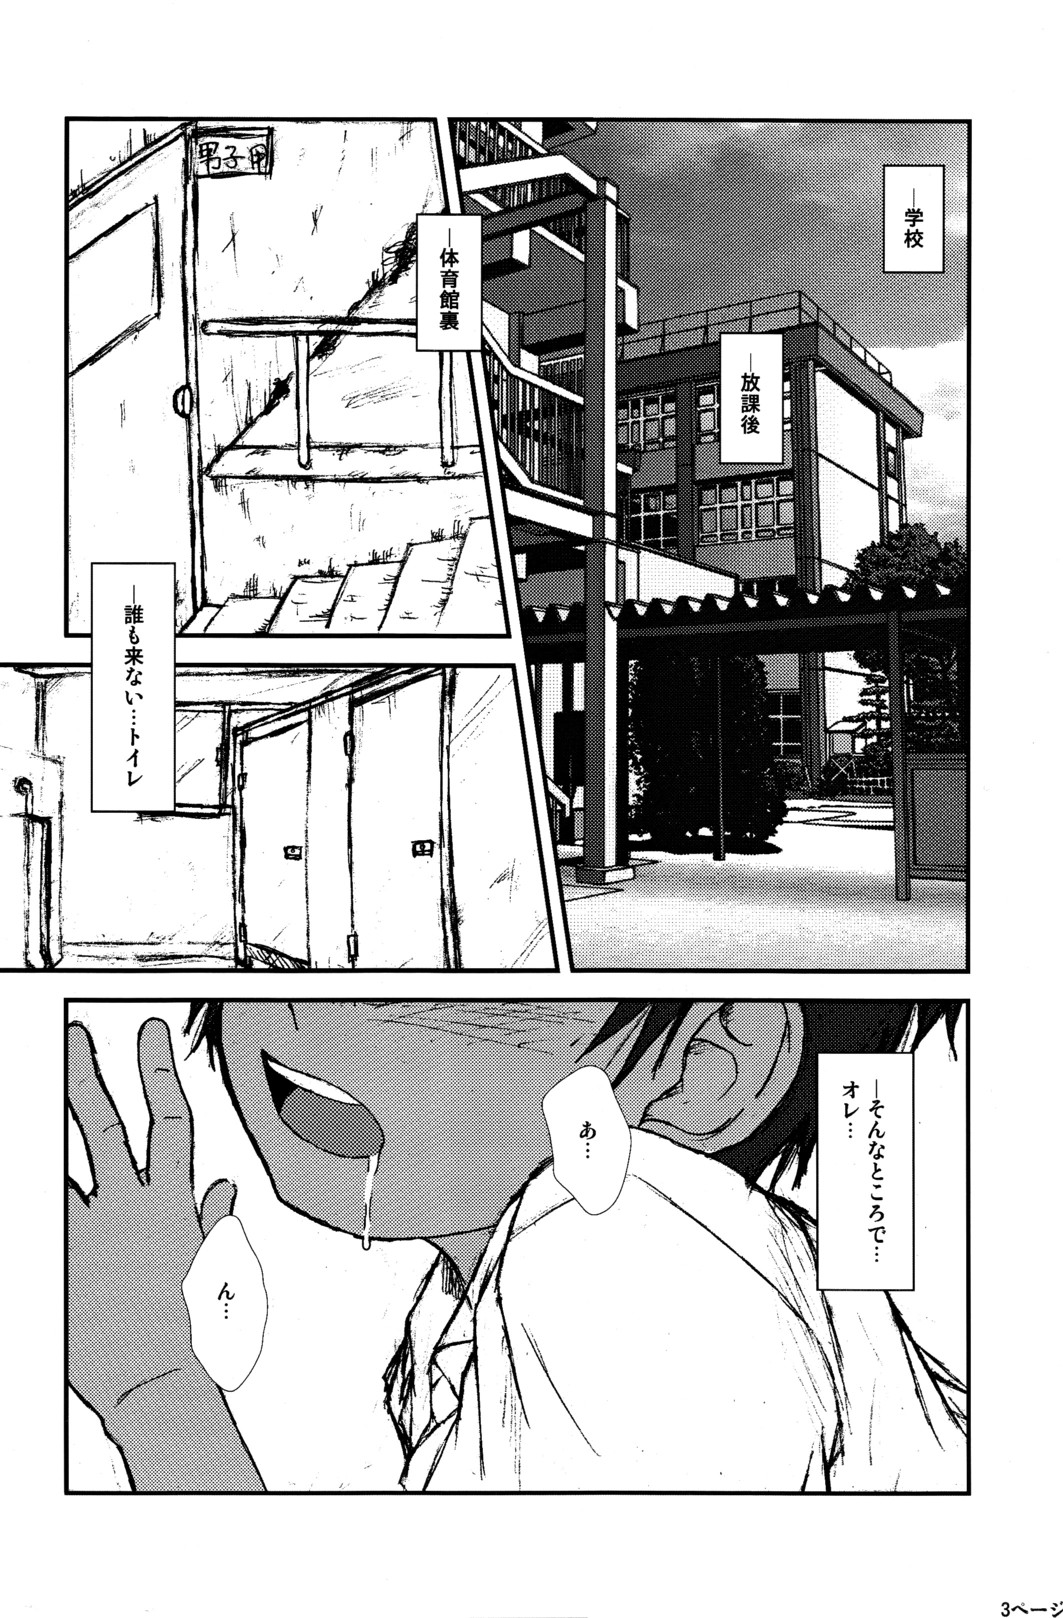 Crow (Theory of Heaven) - Honey Kami the 2nd vol.0.7 page 3 full